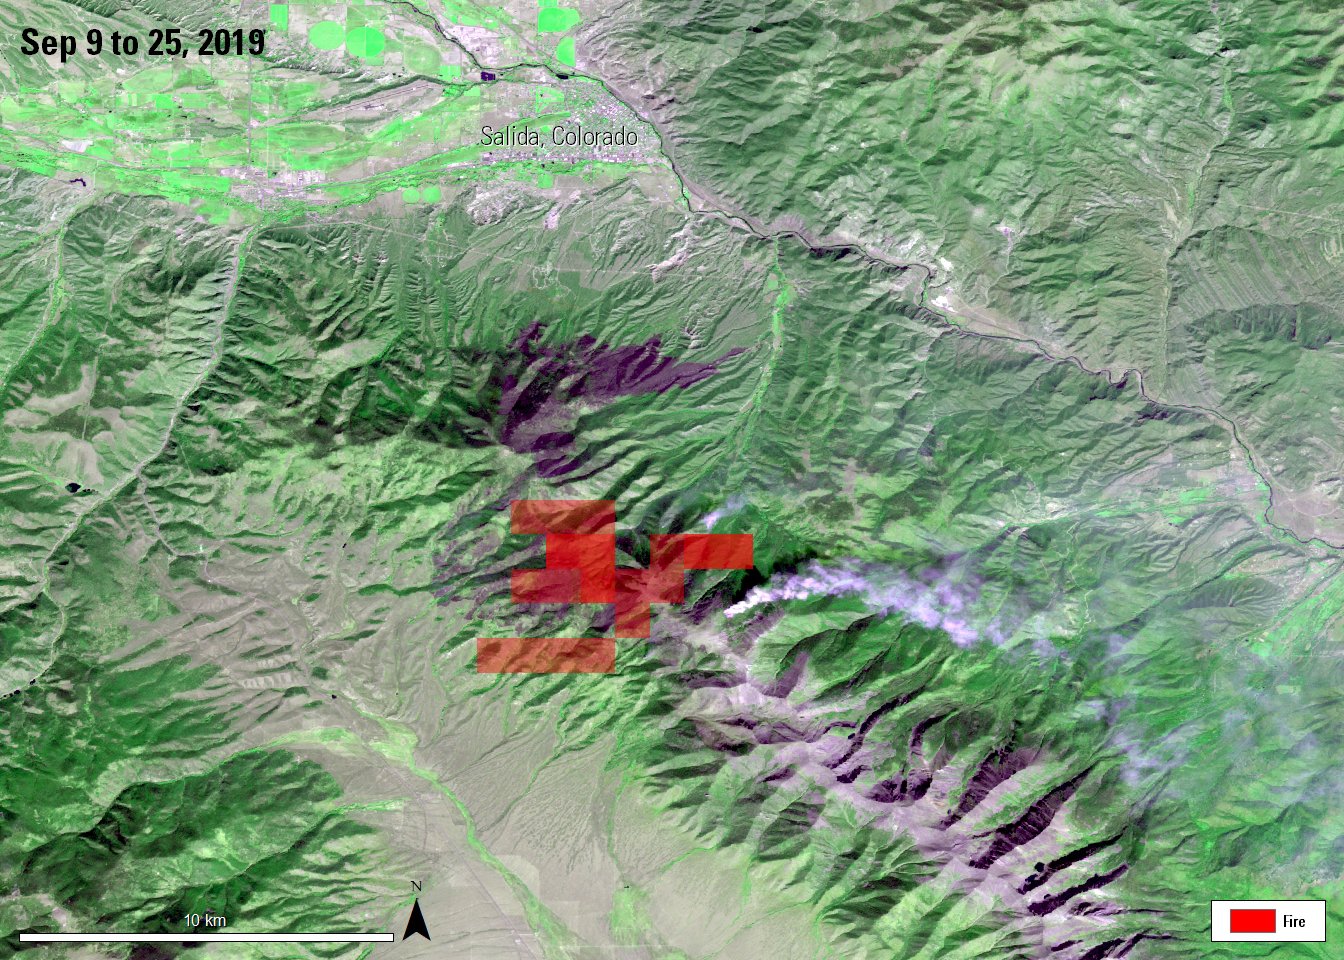 VNP14 products from Sep 9 to Sep 25, 2019 overlaid on AST_L1T image of Decker Fire near Salida, Colorado, acquired on October 12, 2019.